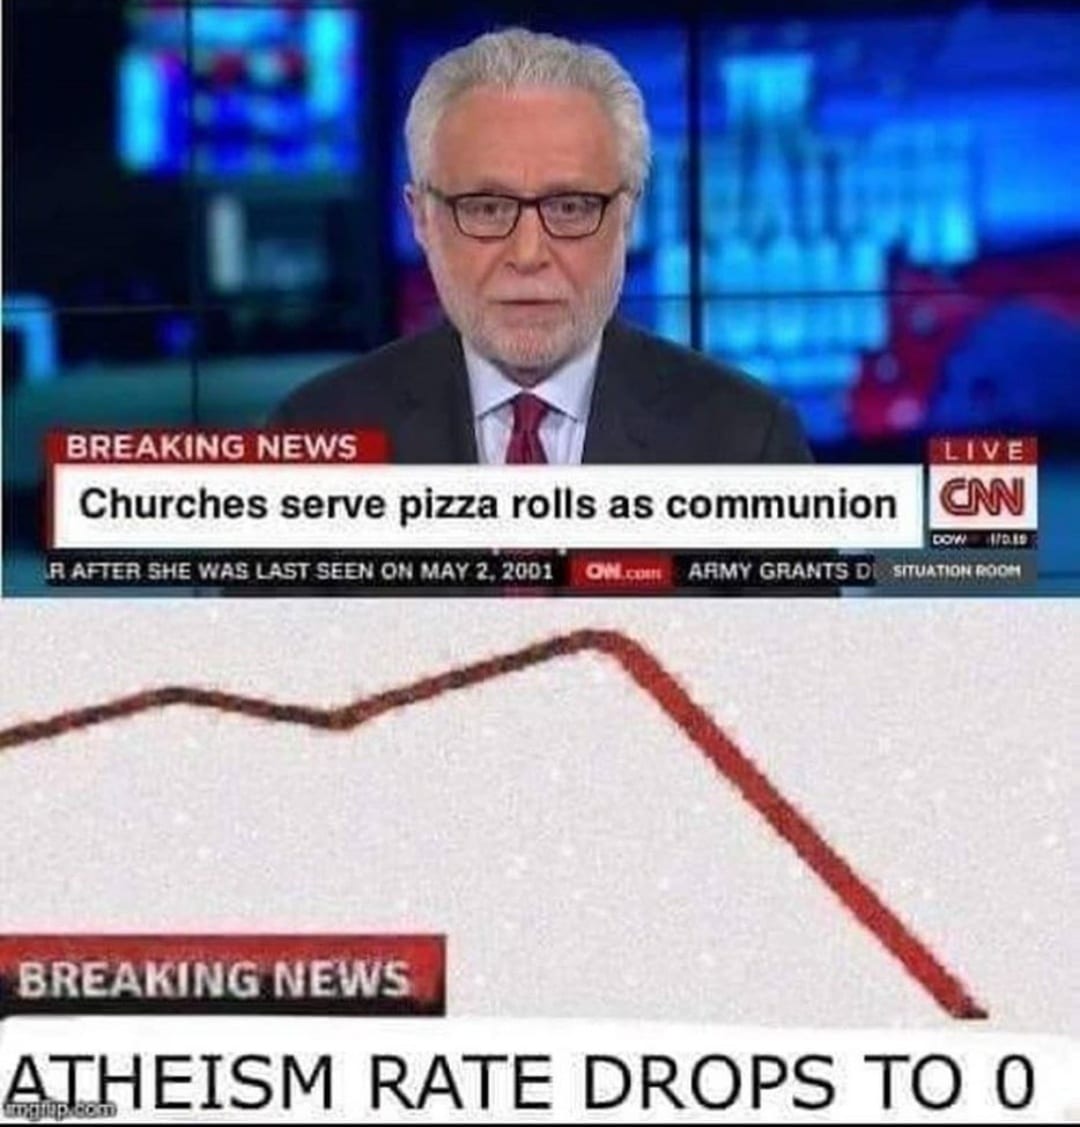 christian christian-memes christian text: BREAKING NEWS L IVE Churches serve pizza rolls as communion 'CRAFTER SHE WAS LAST SEEN ON MAY 2.2001 ARMY GRANTS m. BREAKING NEWS RATE DROPS TO O 